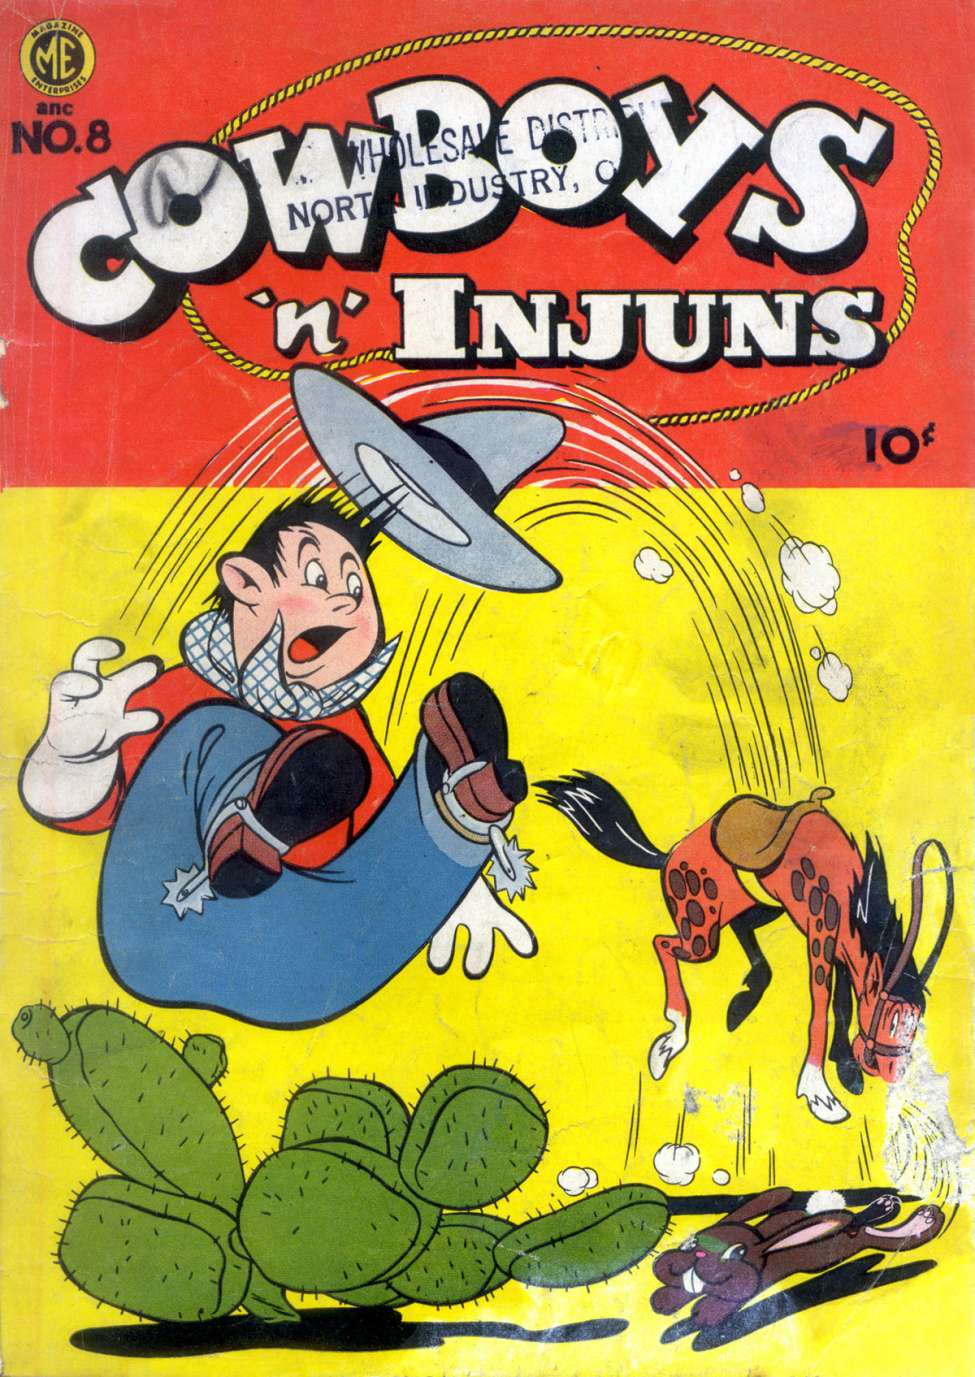 Comic Book Cover For Cowboys 'N' Injuns 8